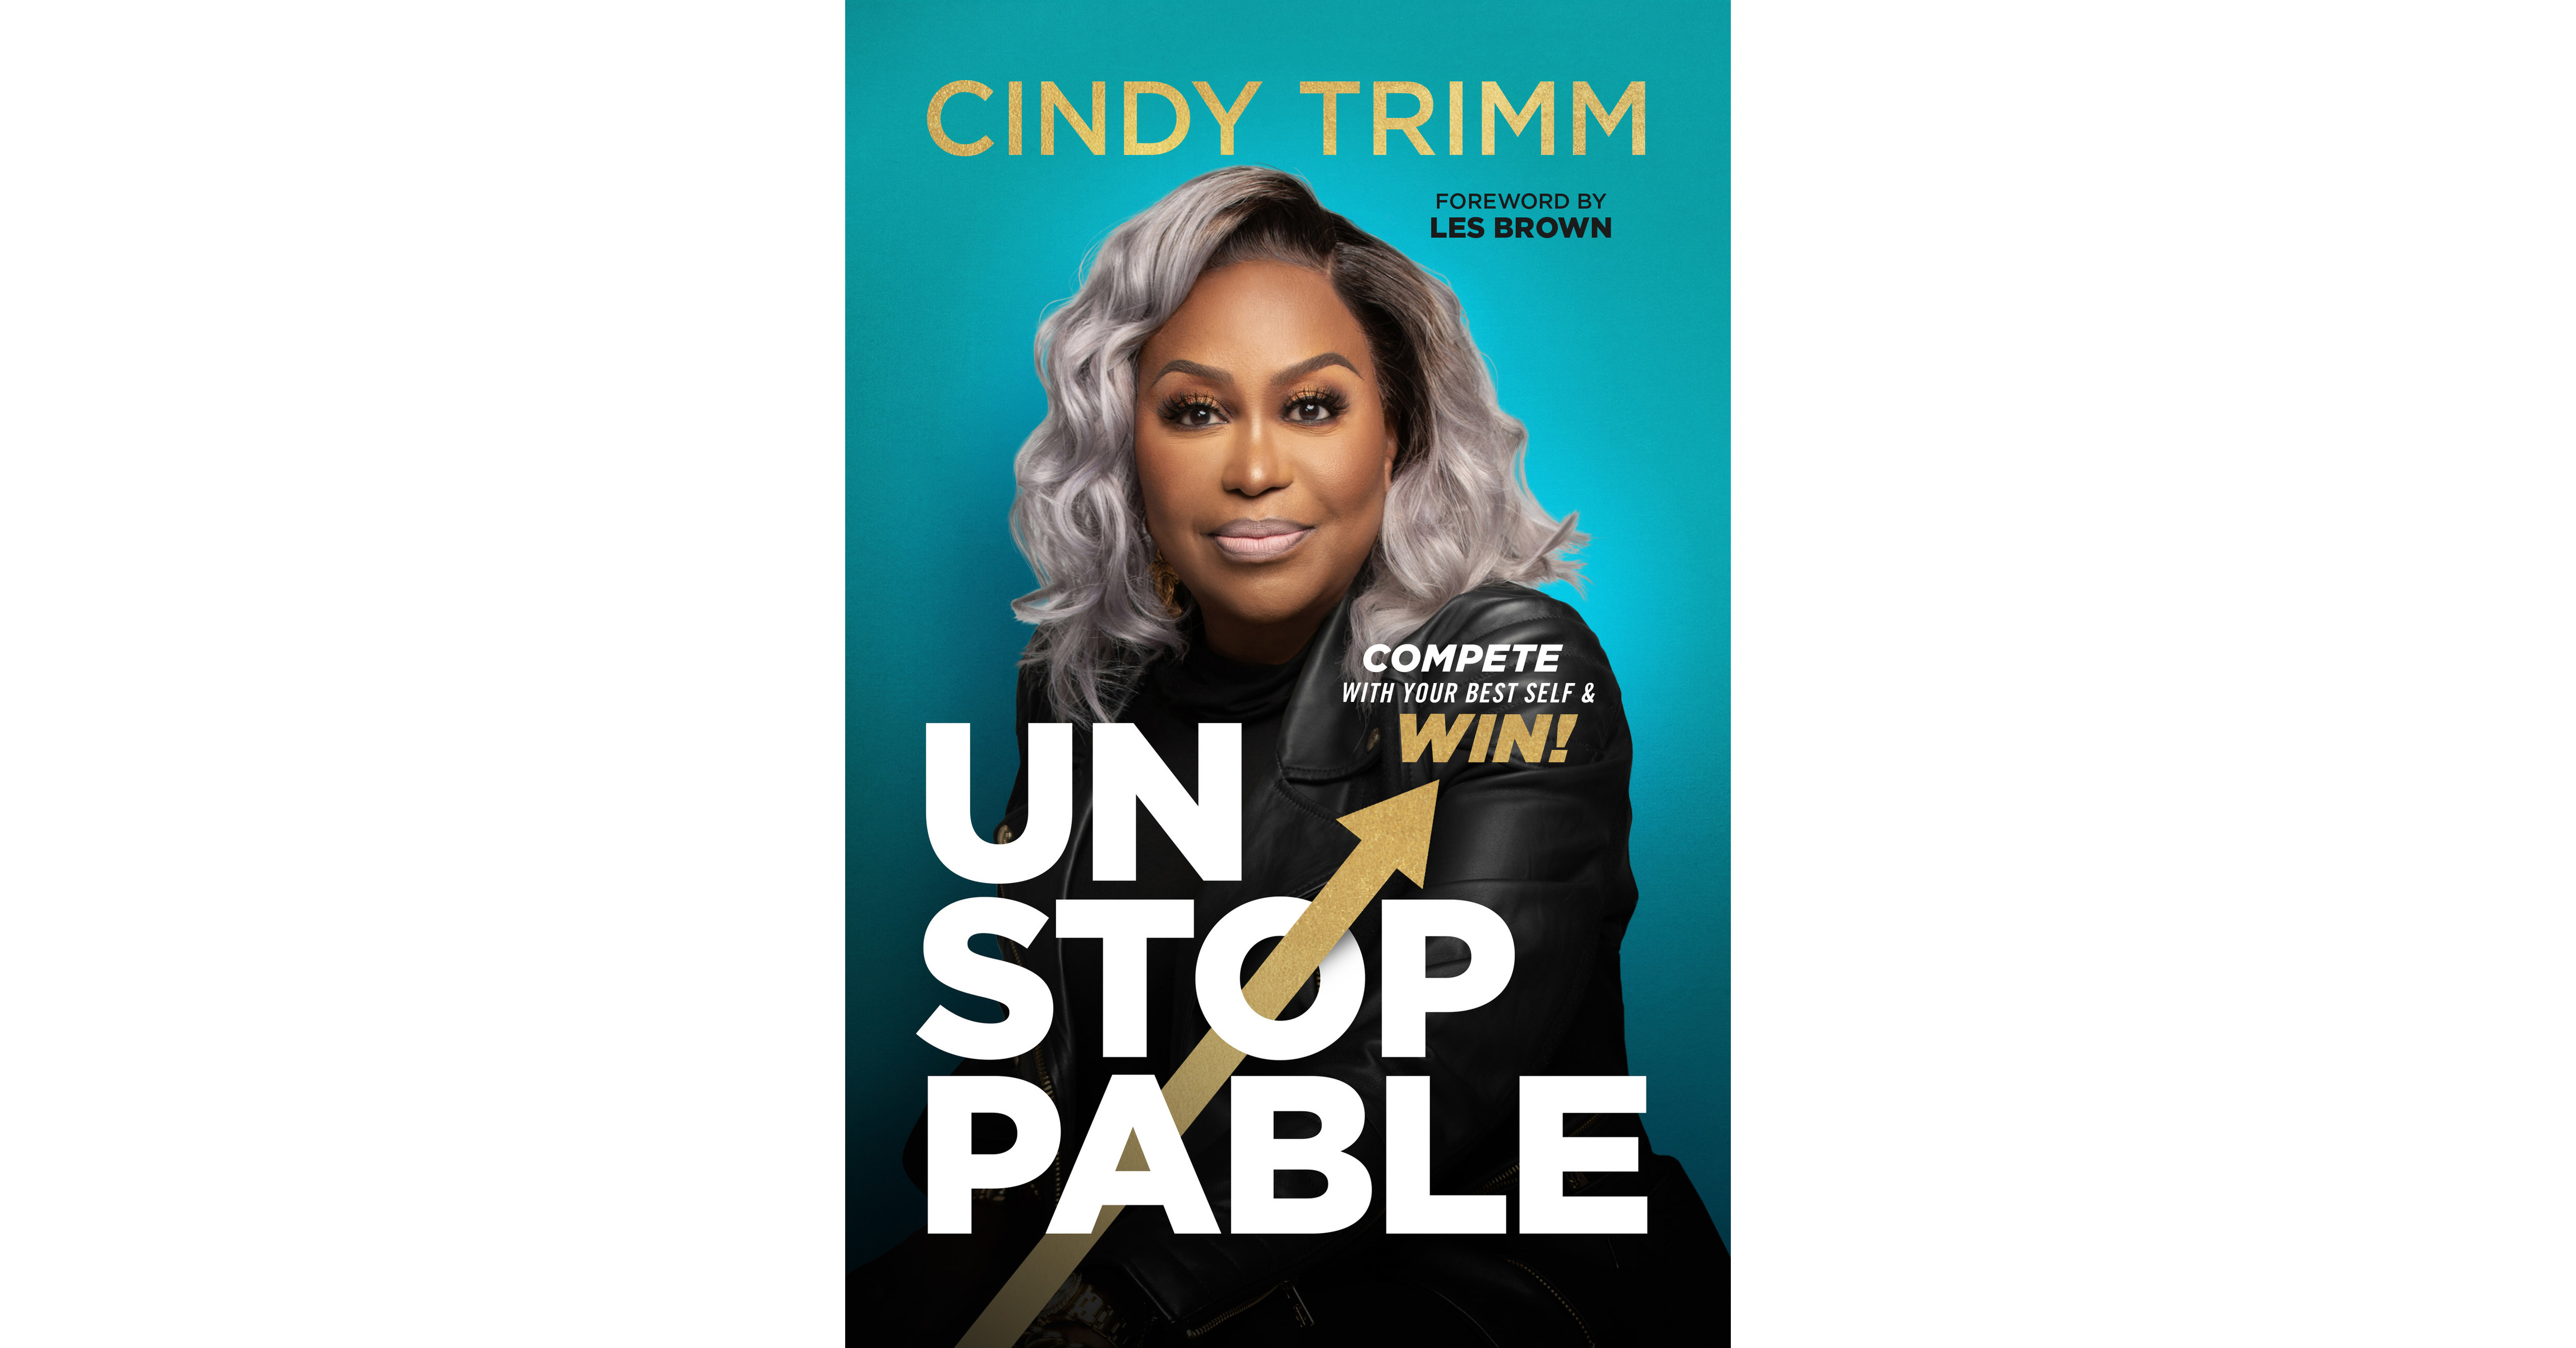 Bestselling Author Dr. Cindy Trimm Releases New Book "Unstoppable